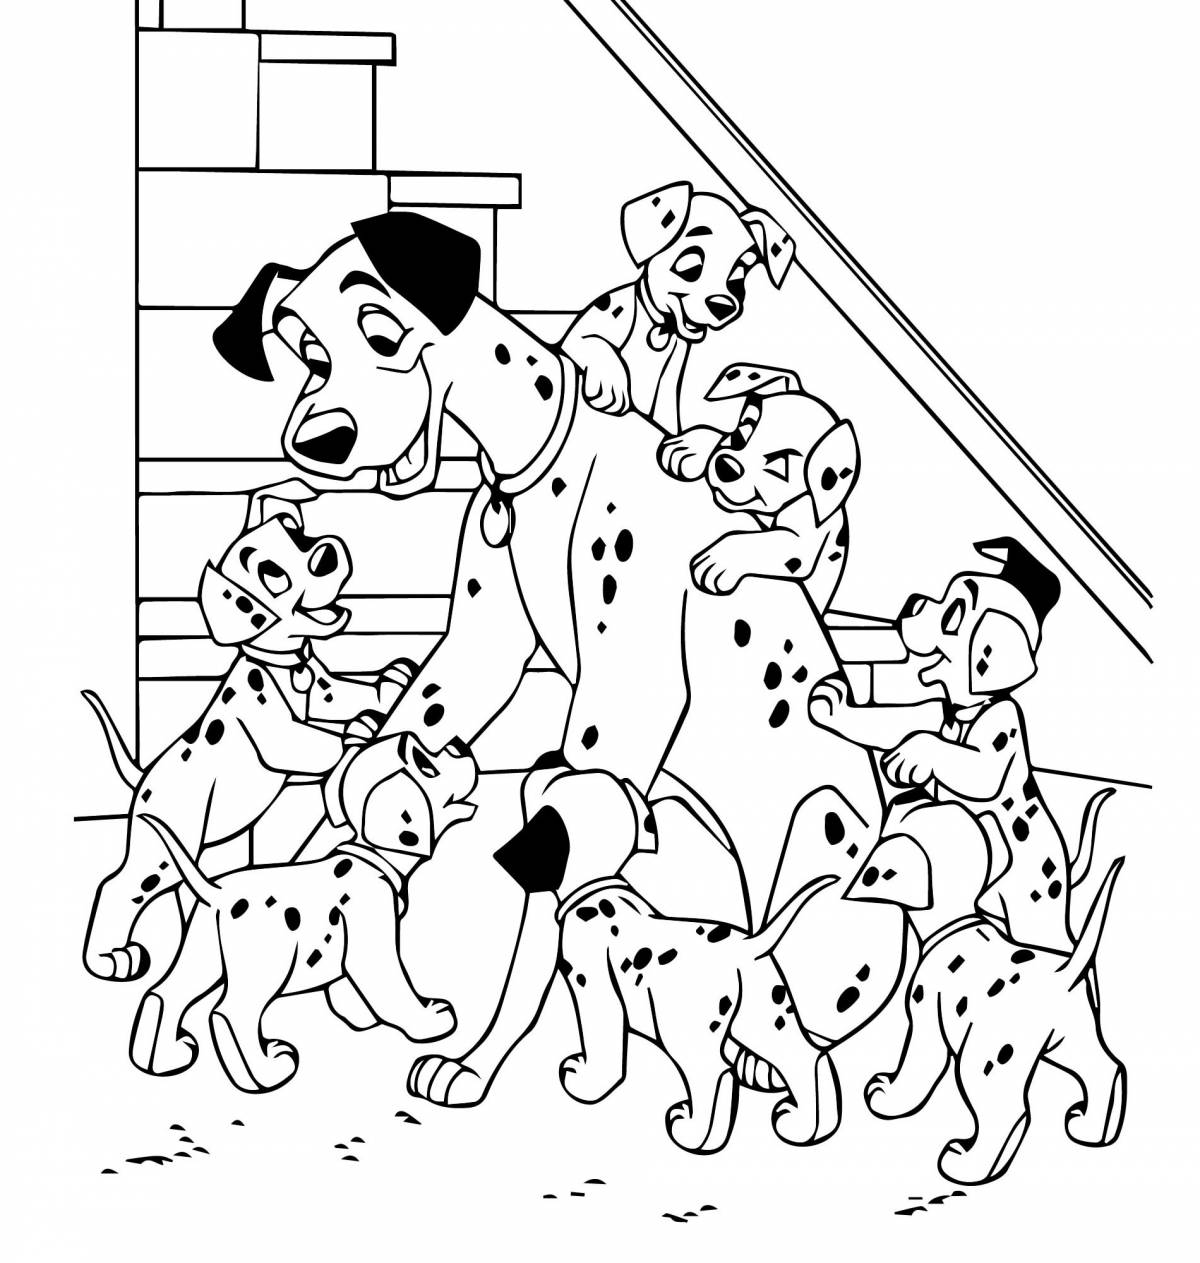 Coloring page affectionate dog family